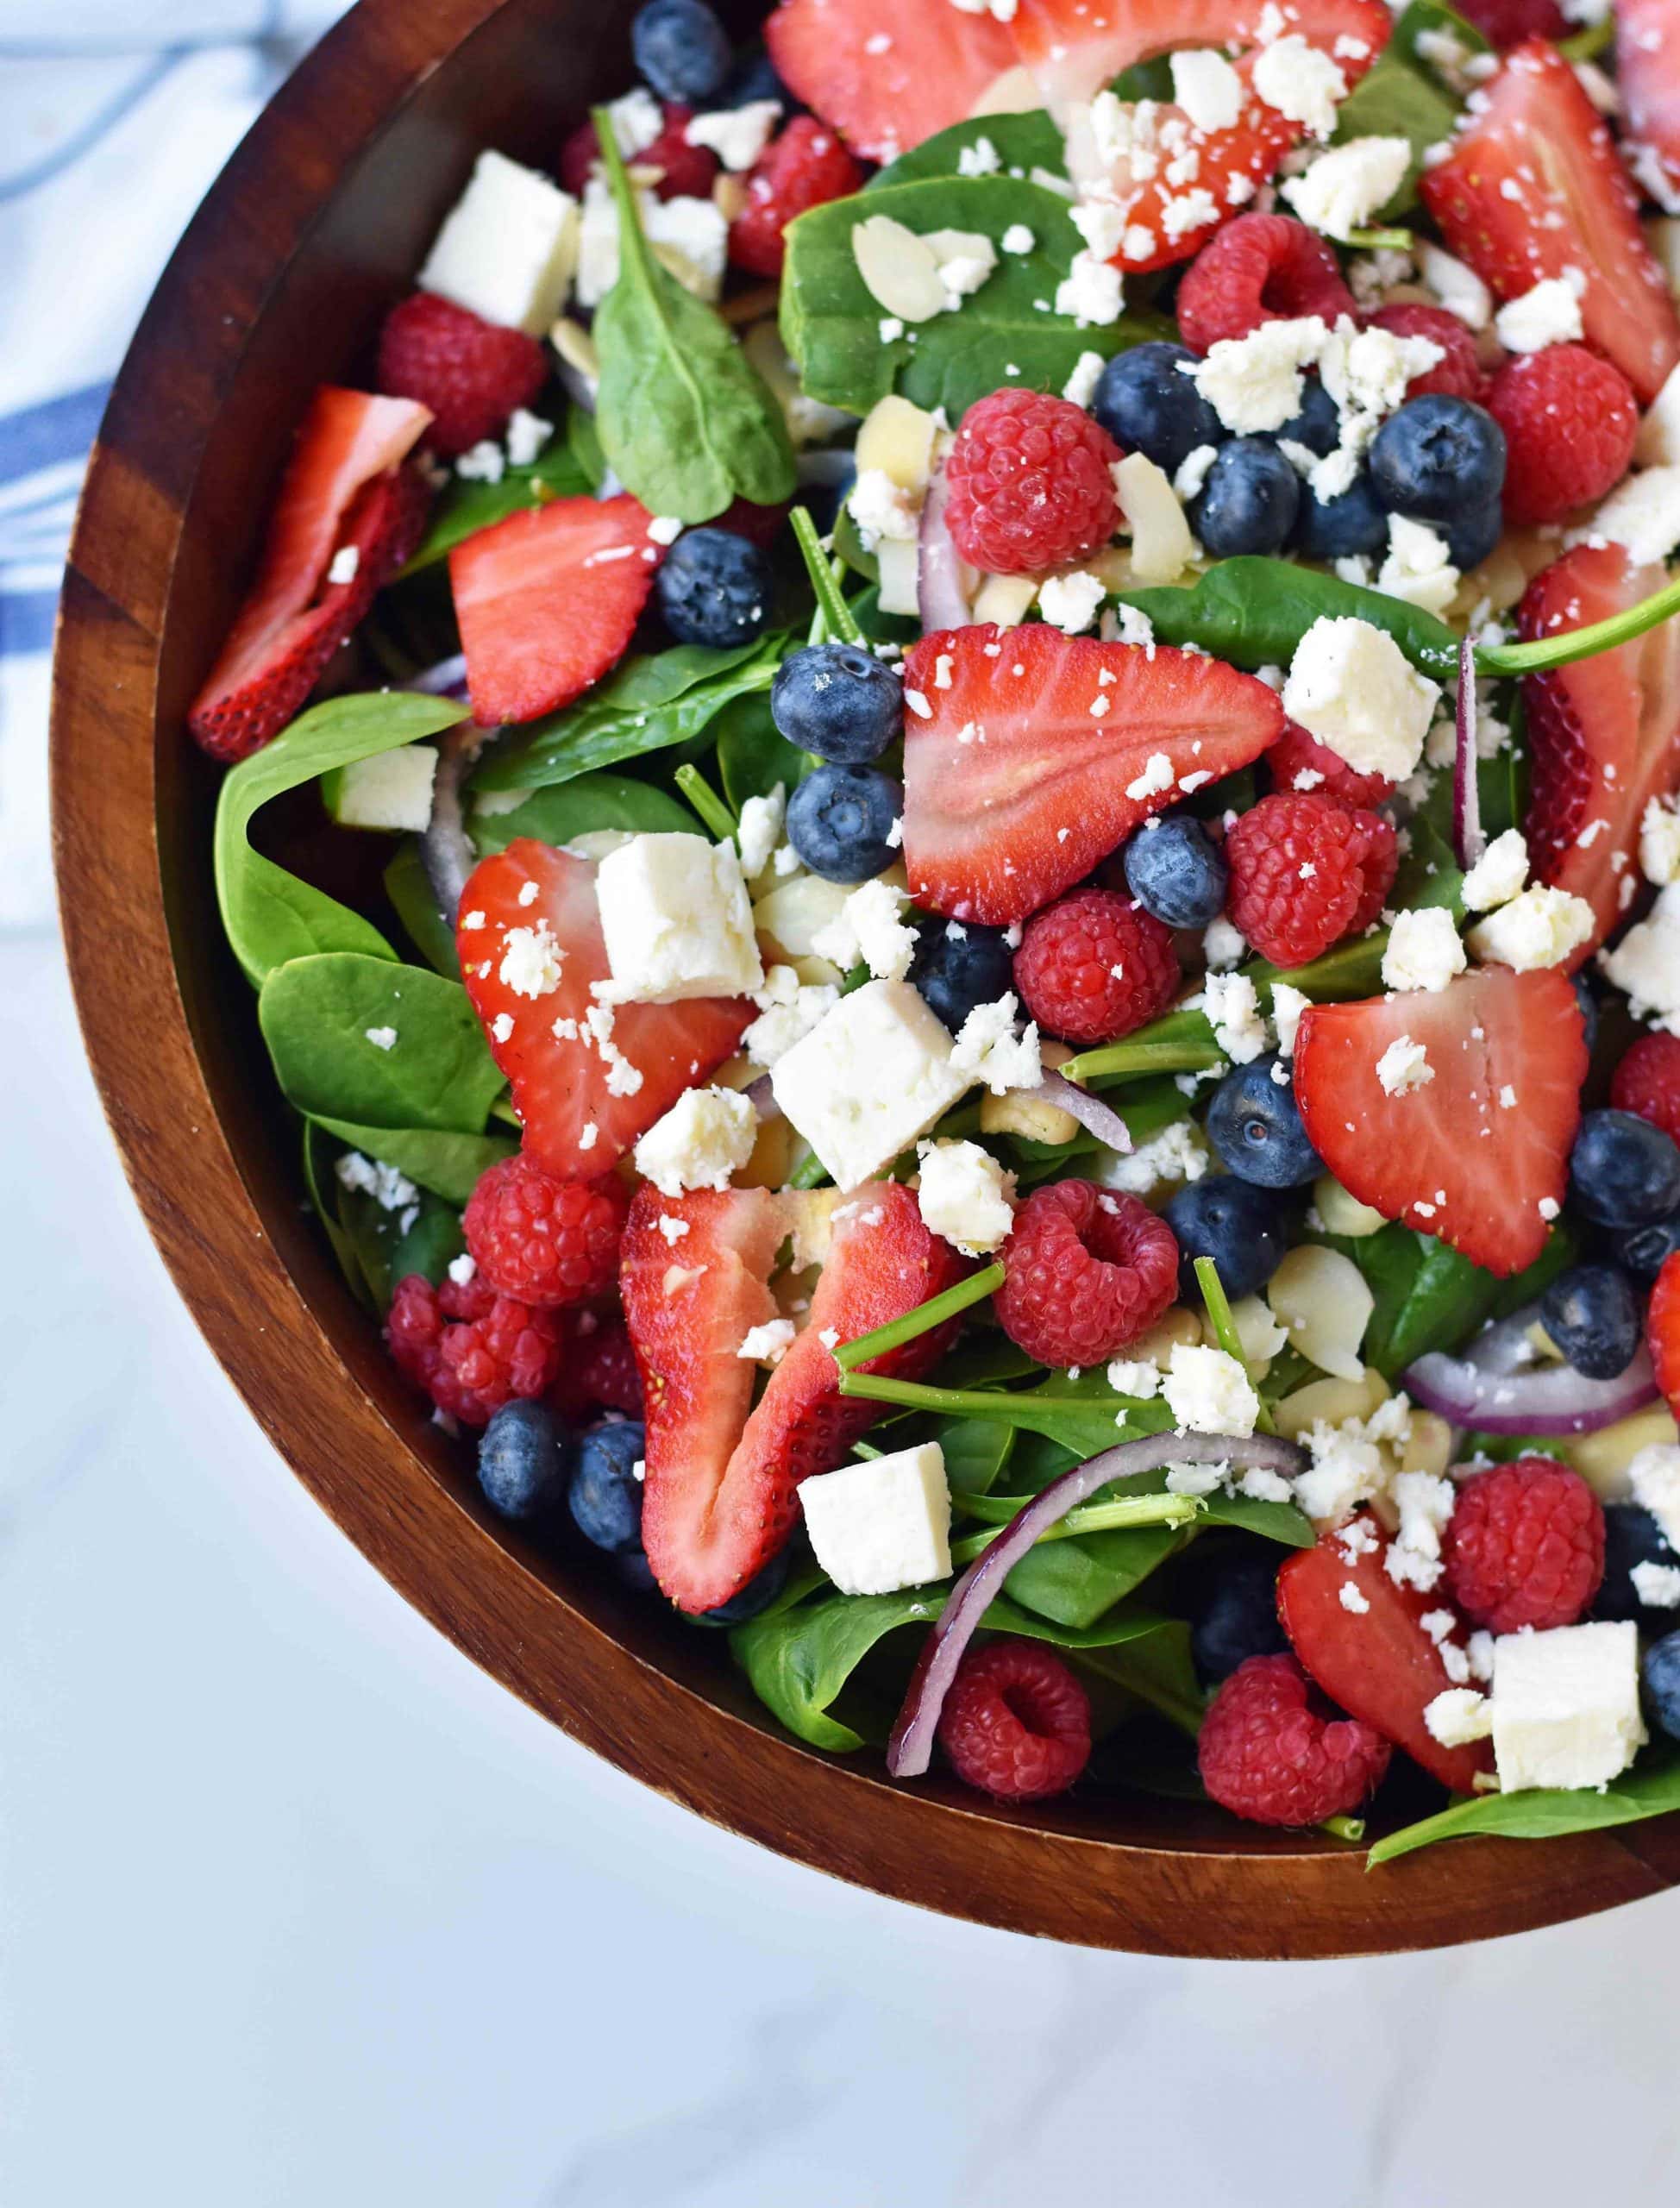 A salad in a wooden bowl full of spinach, fresh berries and feta cheese crumbles.